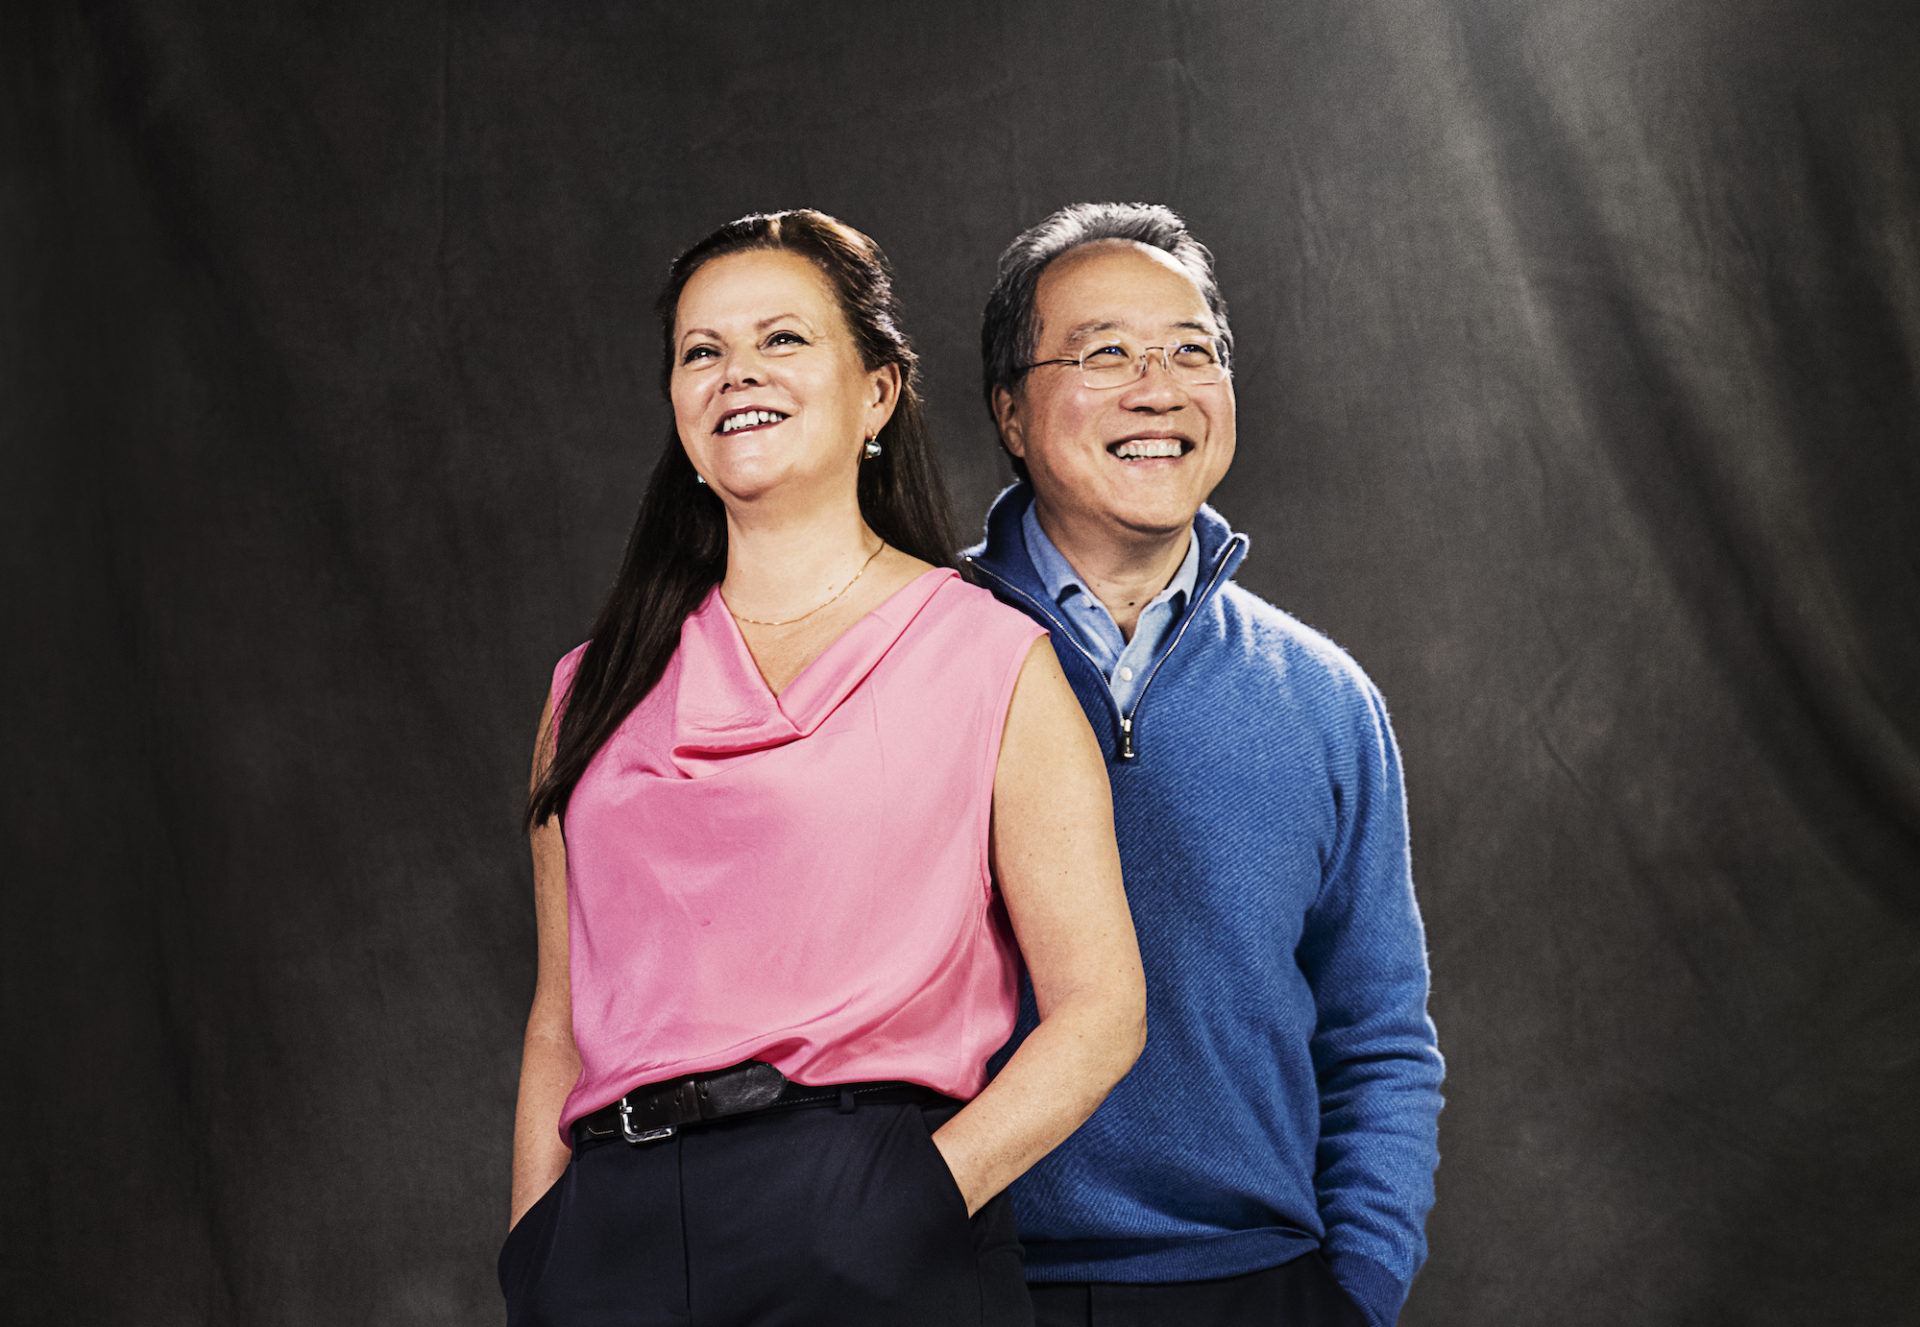 The presence of genius: Yo-Yo Ma and Kathryn Stott sparkle at the Foellinger Great Hall